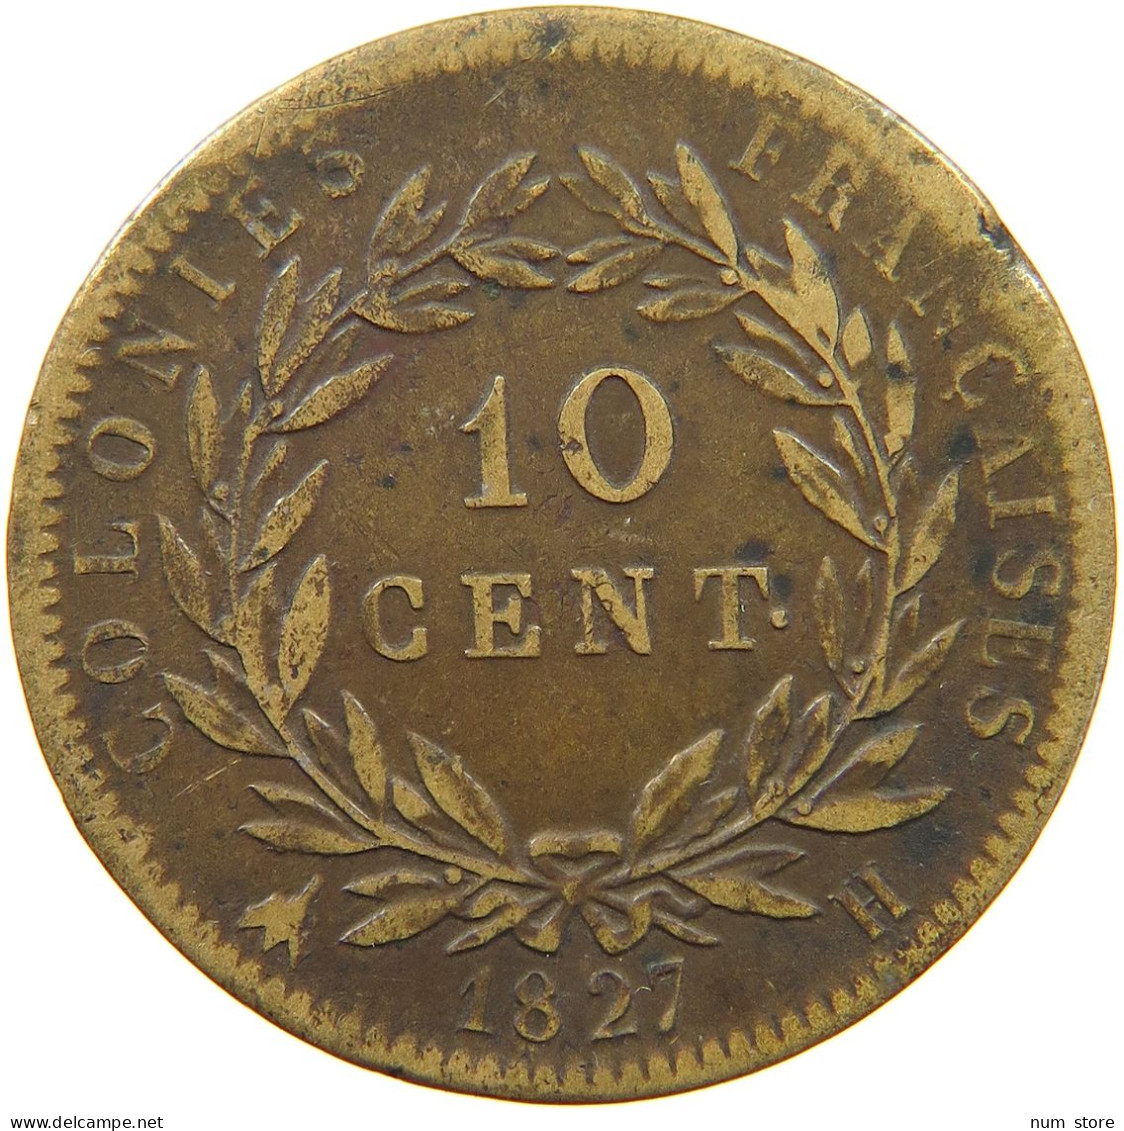 FRANCE COLONIES 10 CENTIMES 1827 H Charles X. (1824-1830) #t120 0395 - Colonias Francesas (1817-1844)